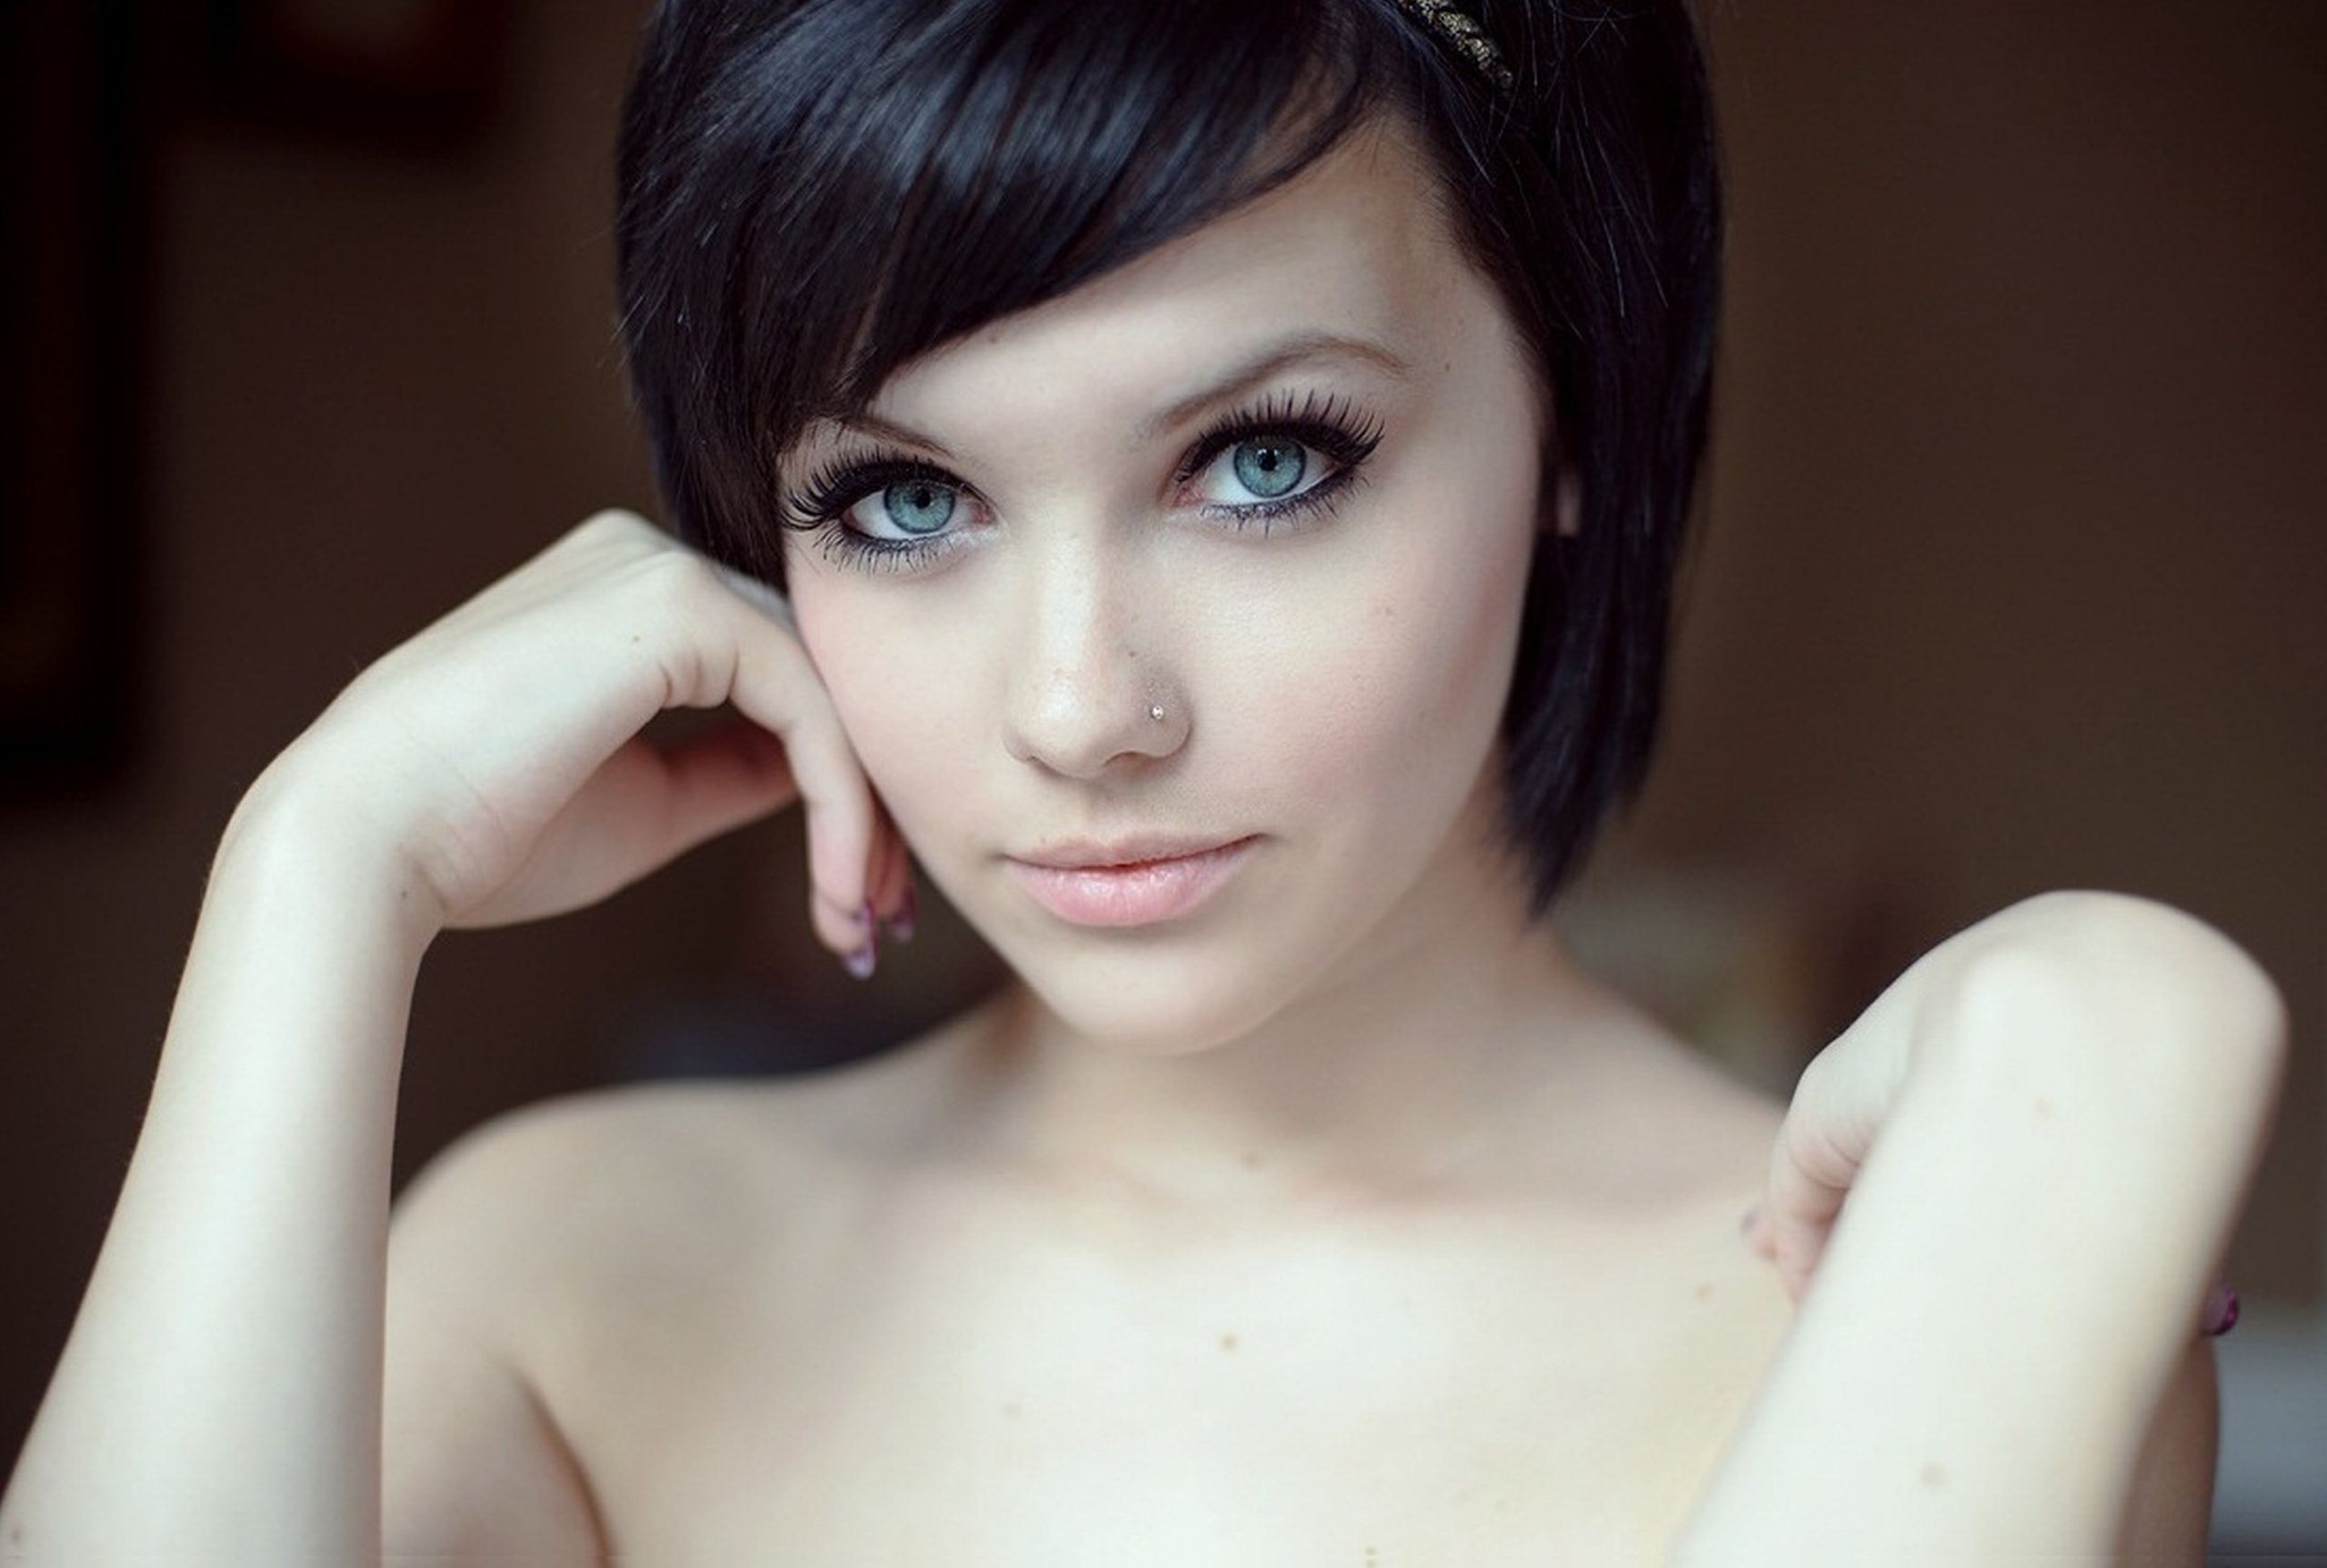 6. Dark-haired beauty with stunning blue eyes - wide 4